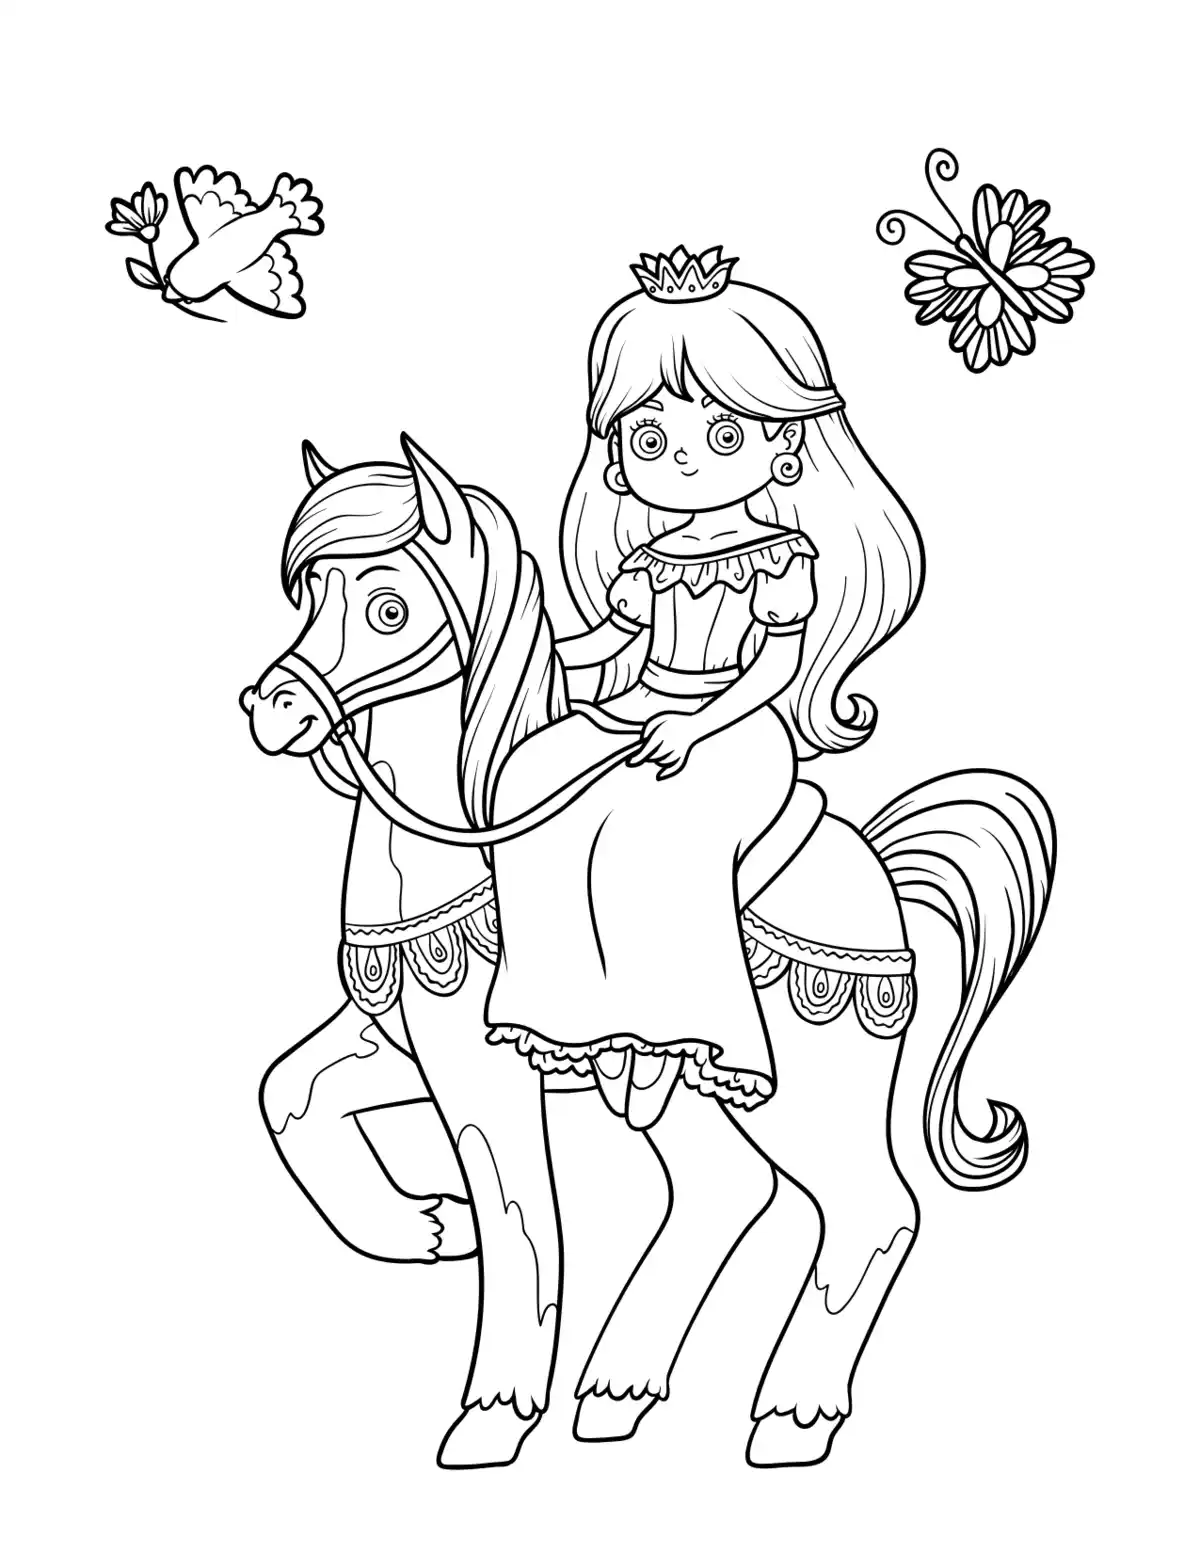 Free Download Coloring PDF, Princess Riding Horse Bird Butterfly Coloring Pages Pdf